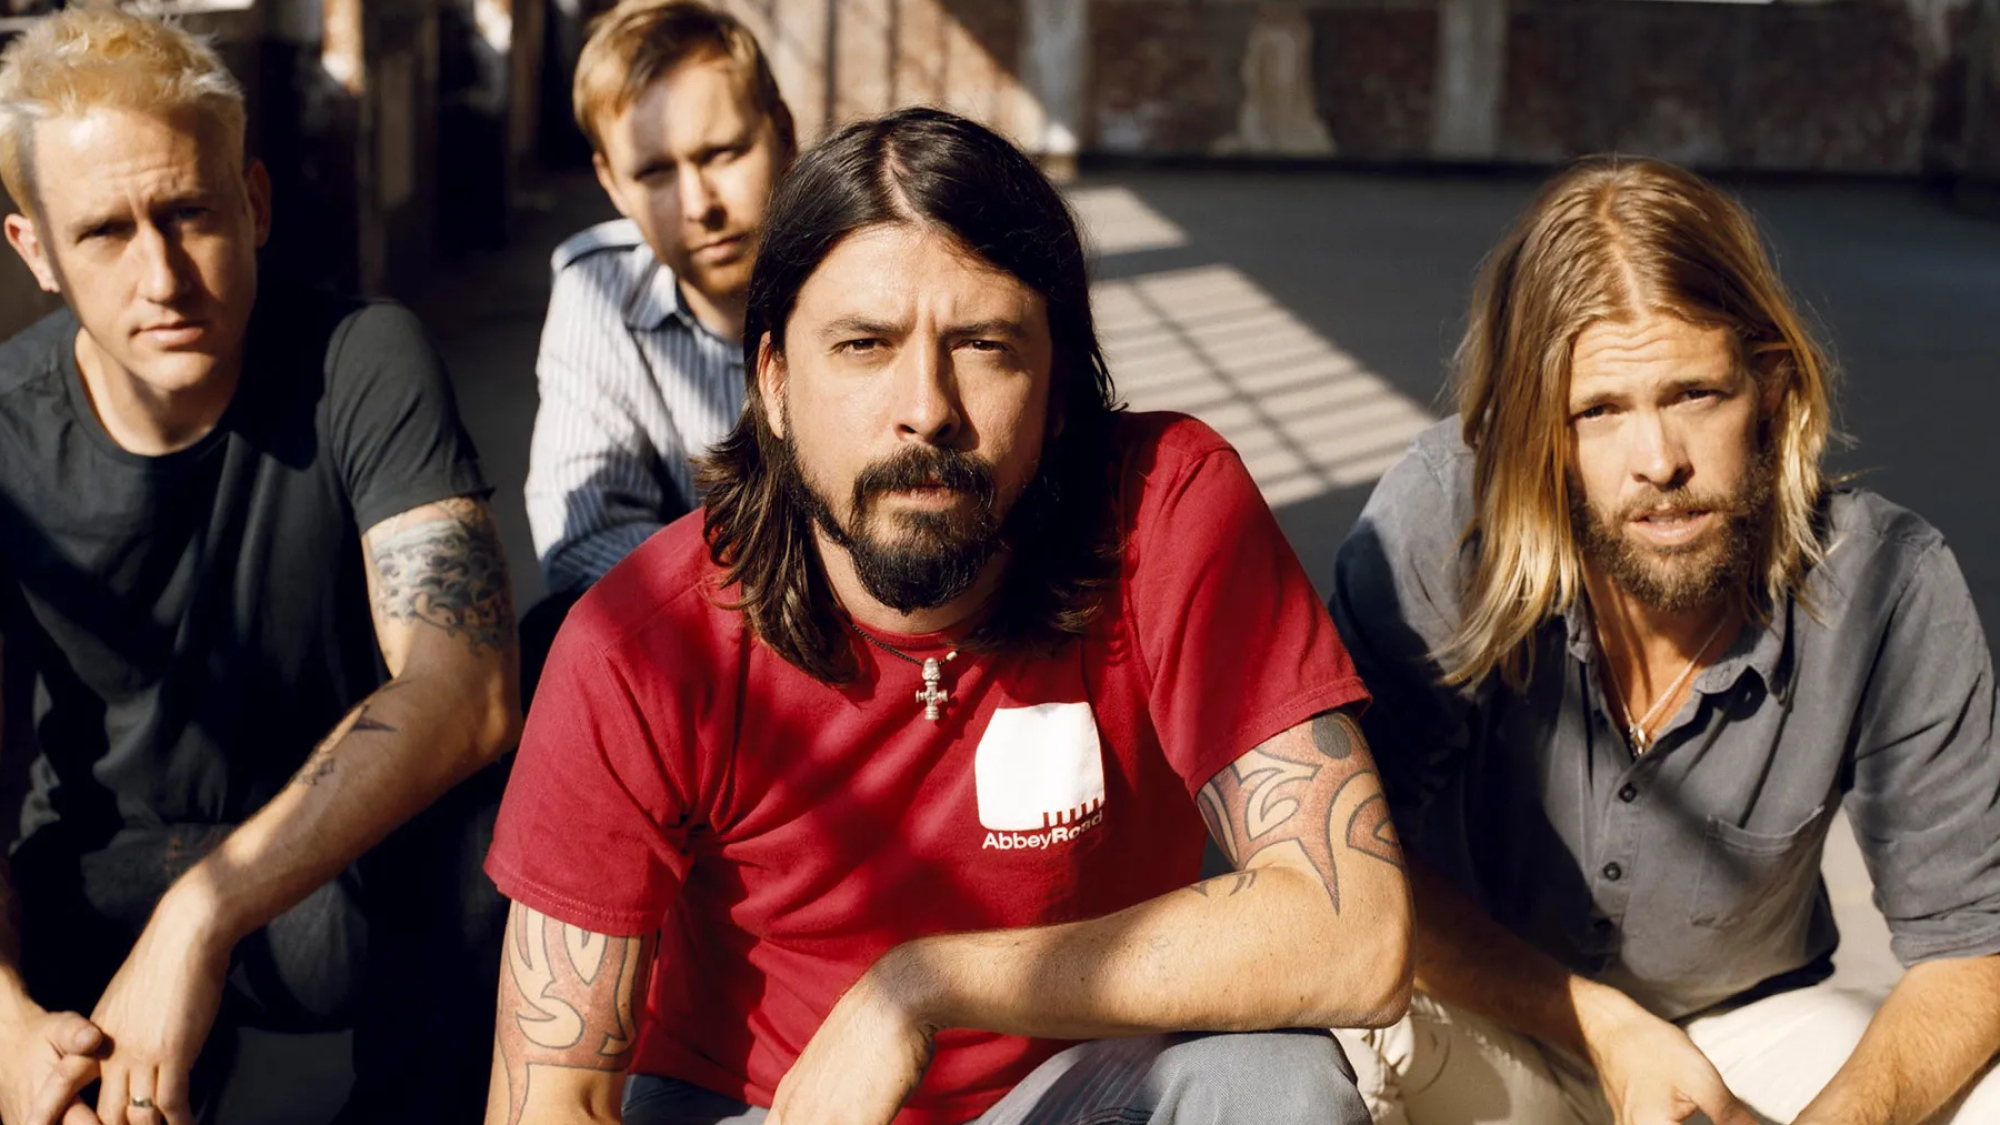 Foo Fighters: The band founded by Nirvana drummer Dave Grohl. 2000x1130 HD Wallpaper.